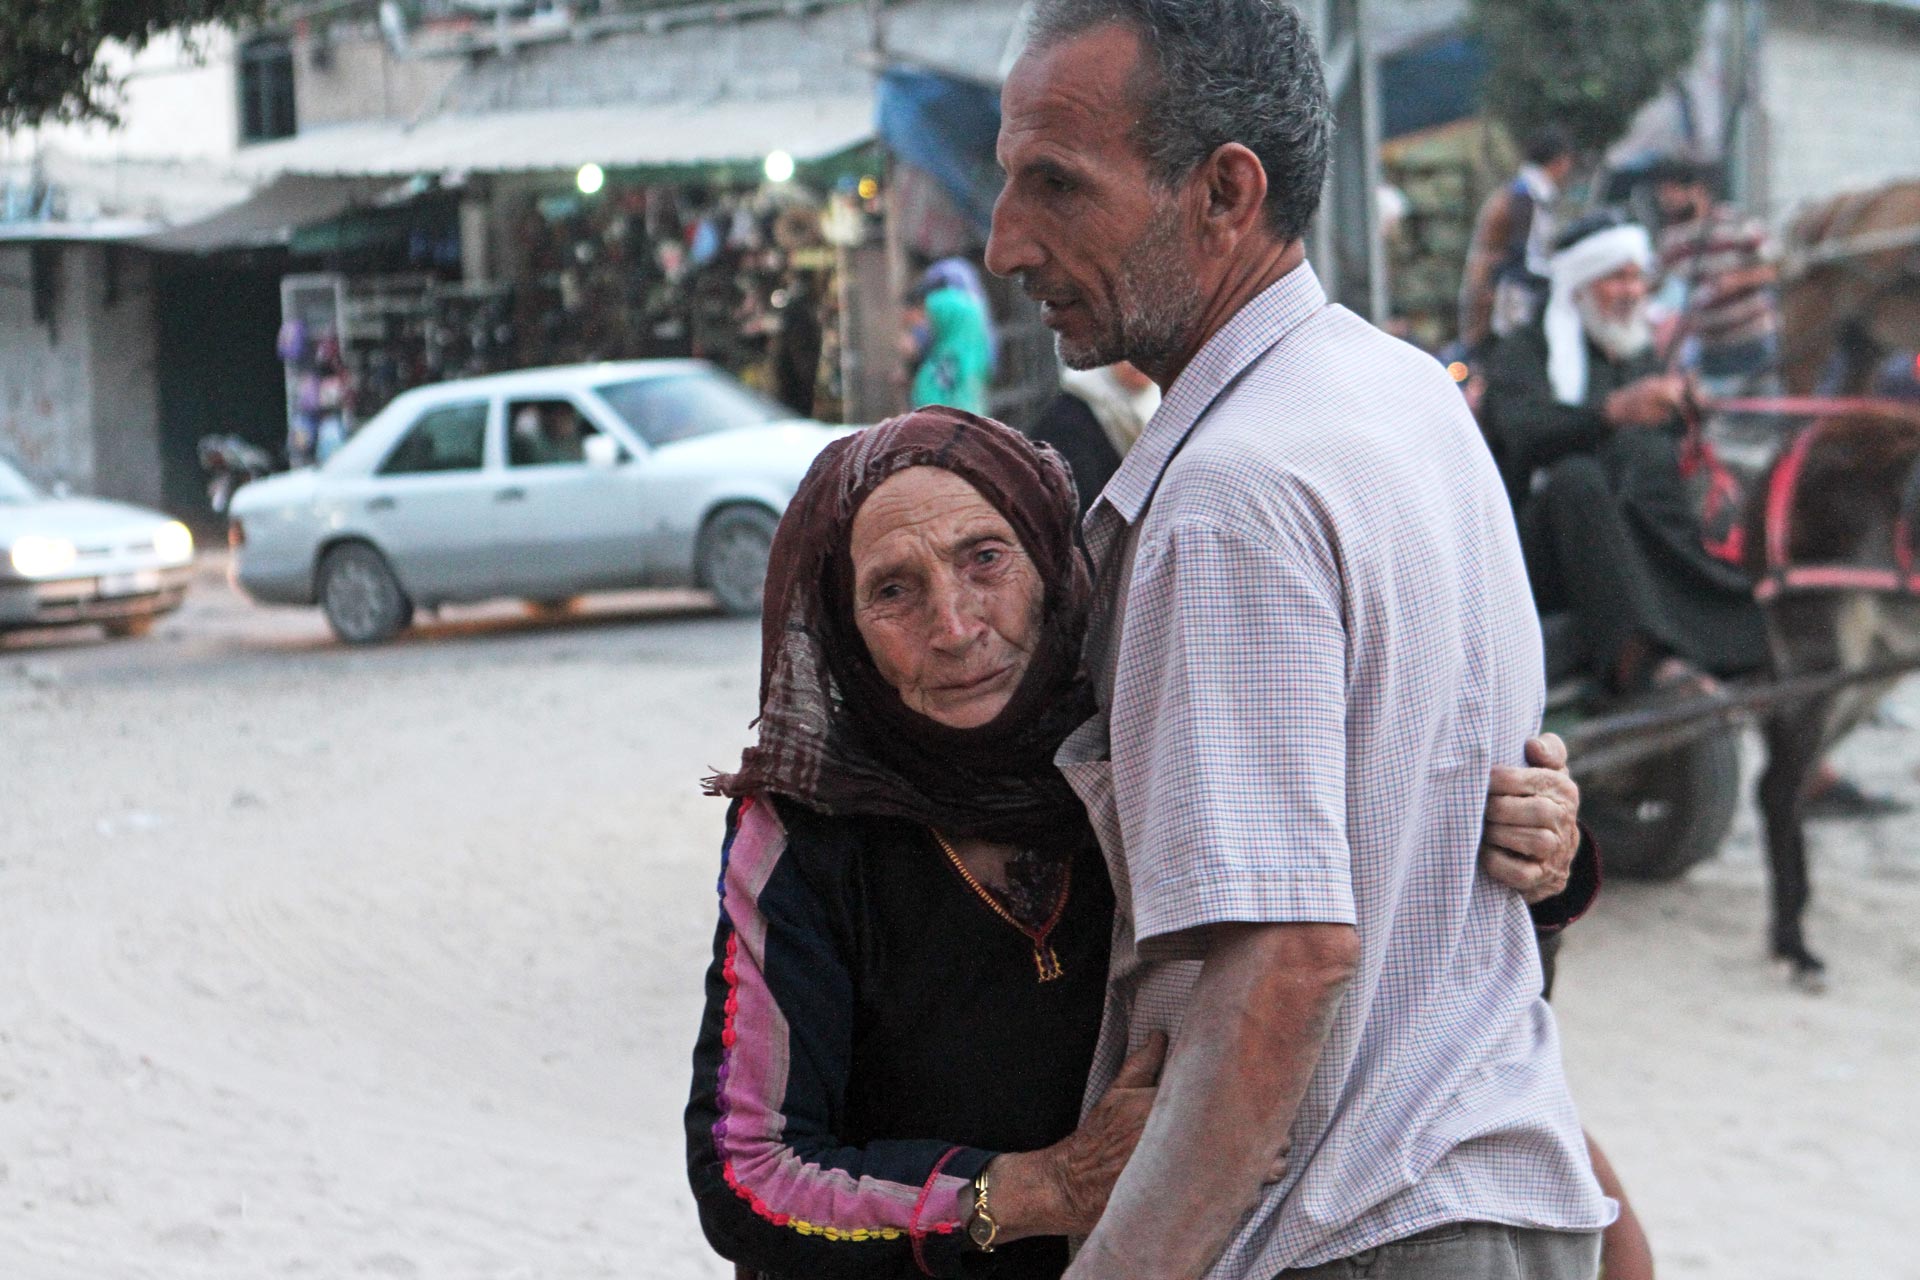 Fatma al-Kilani, always searching or waiting for her son Ibrahim to return home. Here, she embraces her eldest, Saleh.
